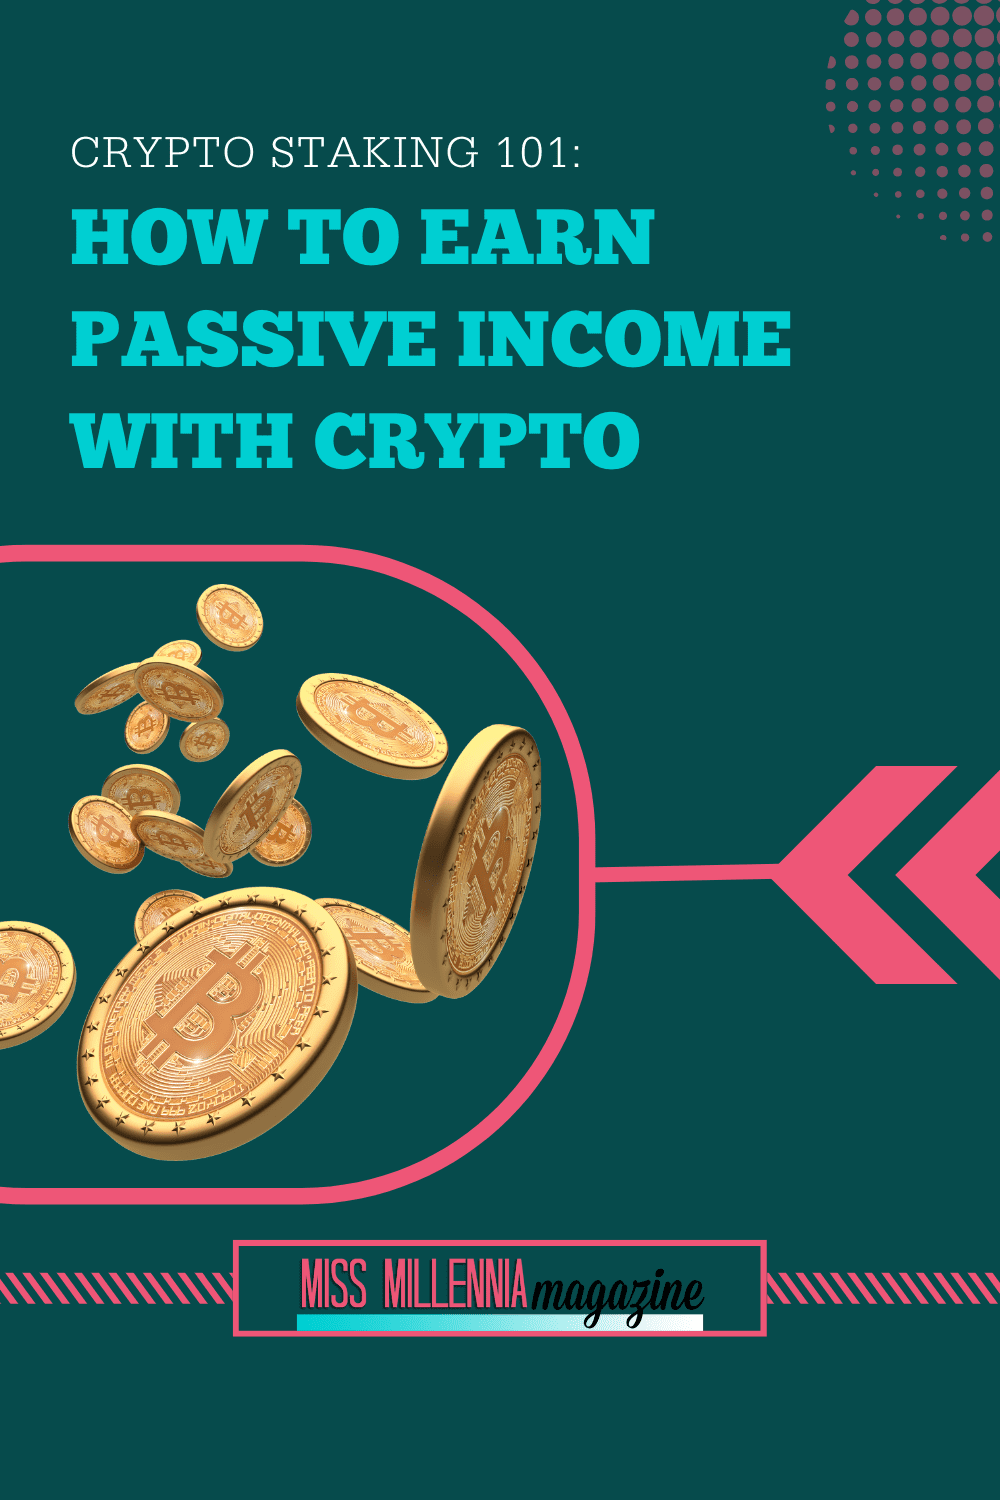 Crypto Staking 101: How to Earn Passive Income With Crypto